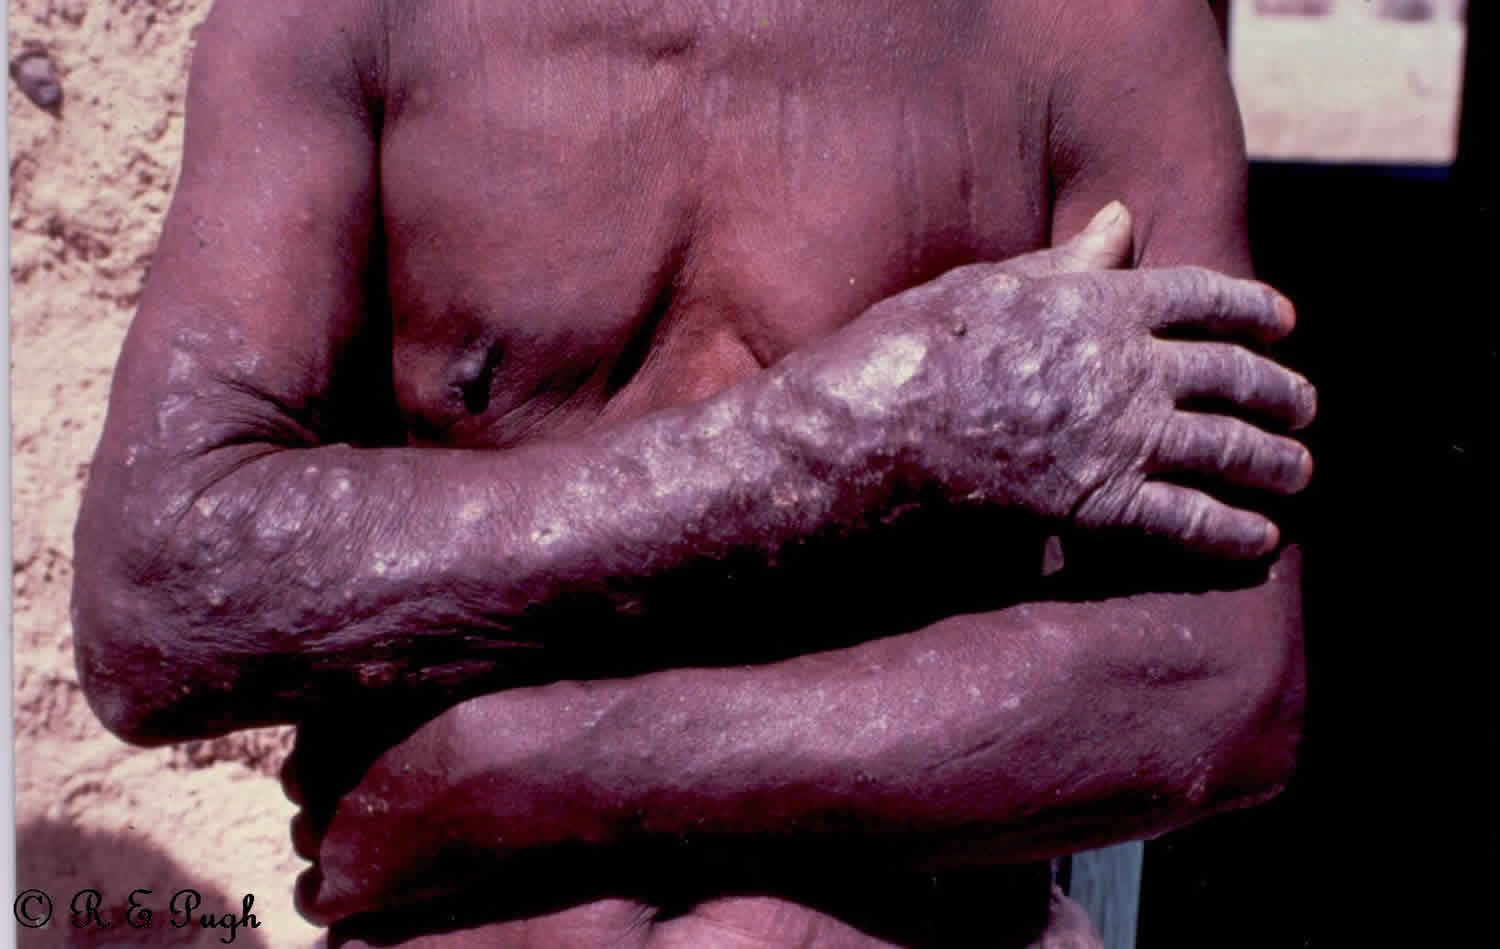 Skin nodules of onchocerciasis patient